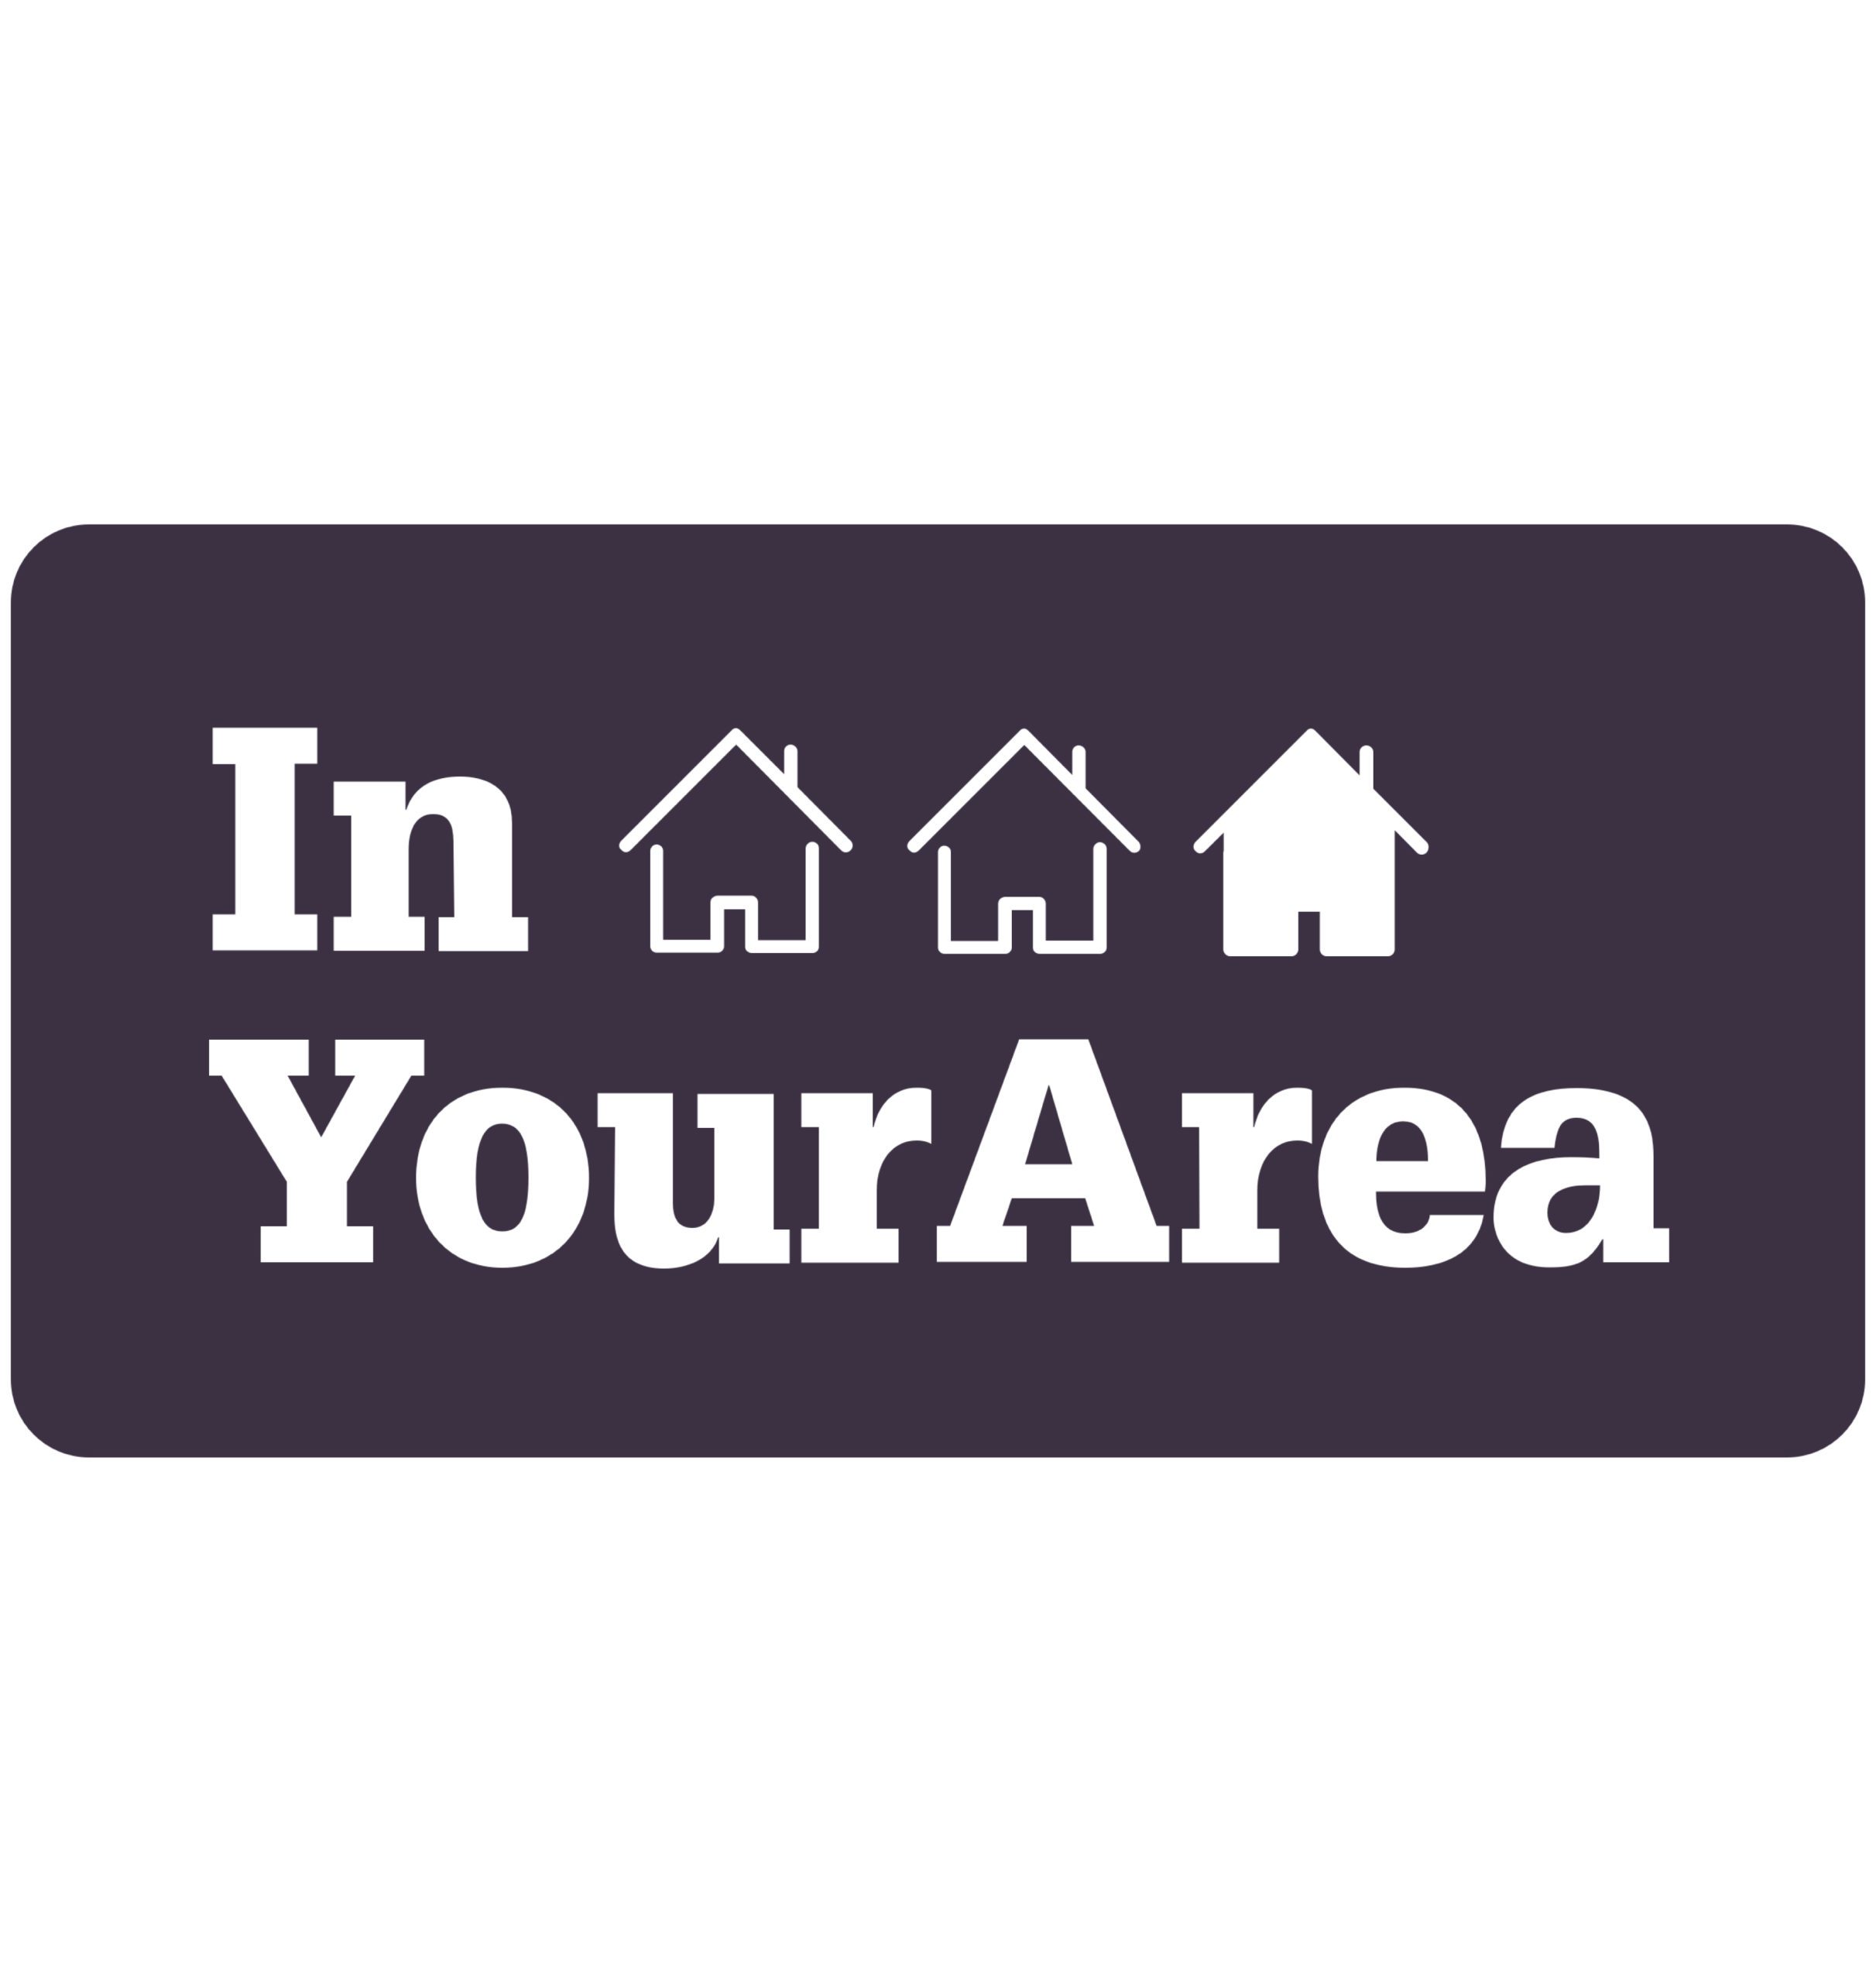 In Your Area logo